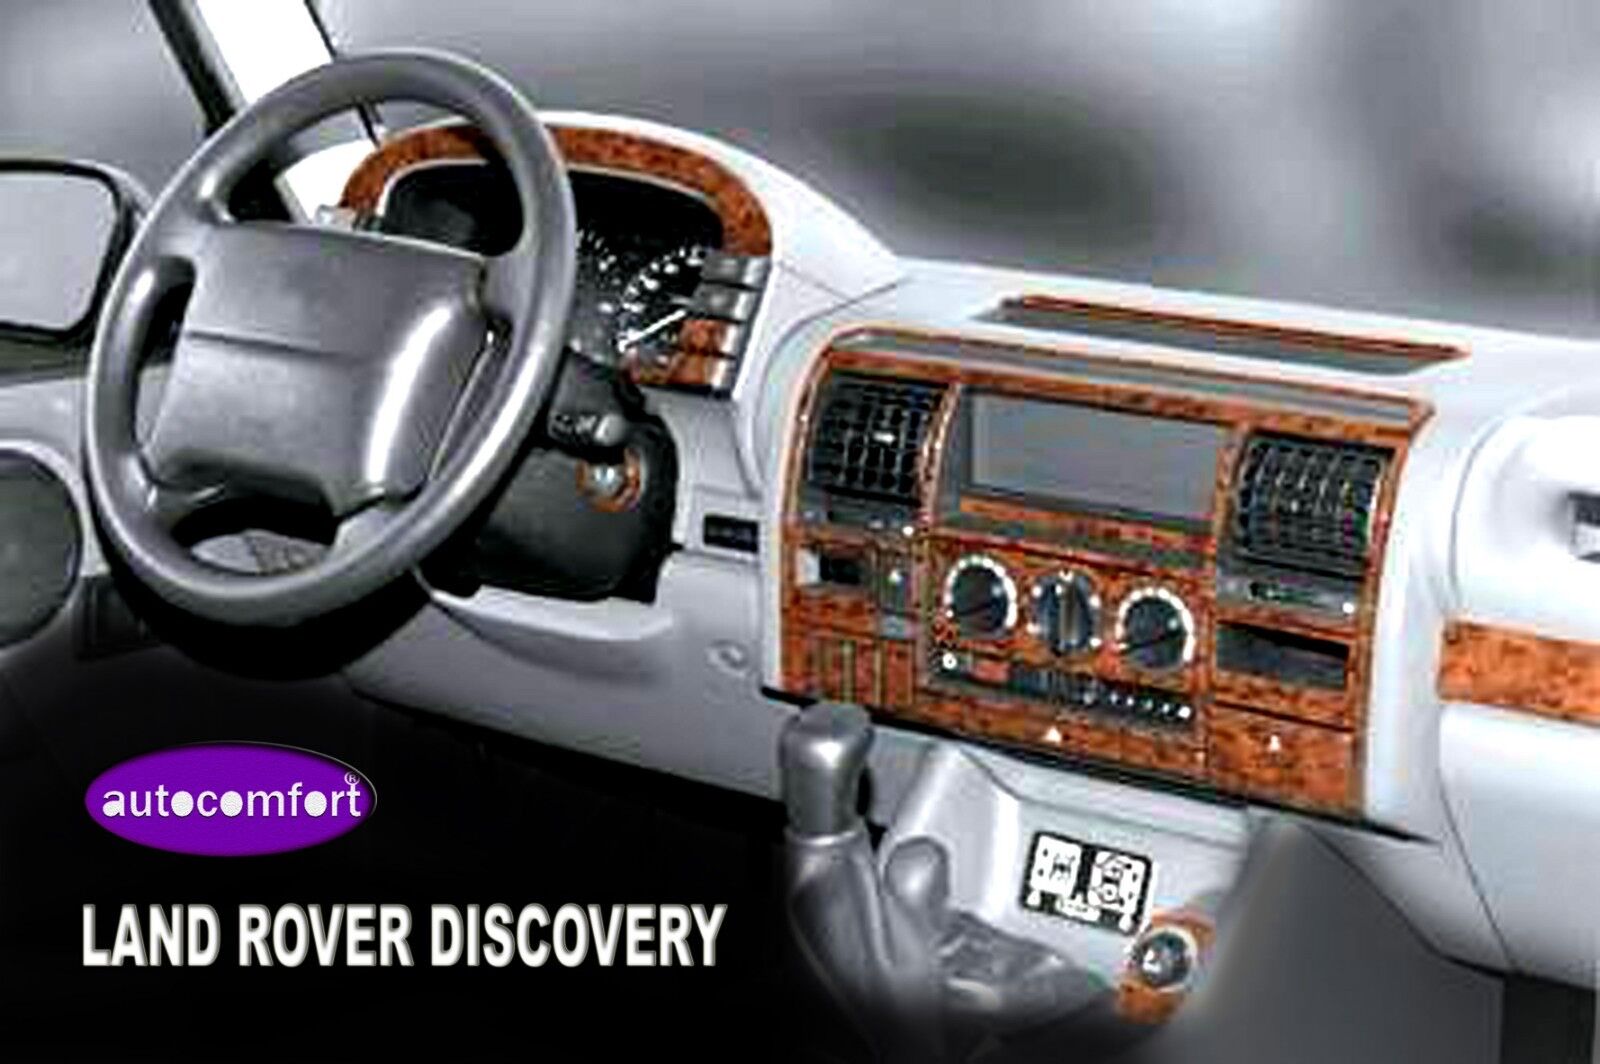 FOR LAND ROVER DISCOVERY Interior Dash Trim Kit 3M 3D 30-Parts Burl Wood 90-1999